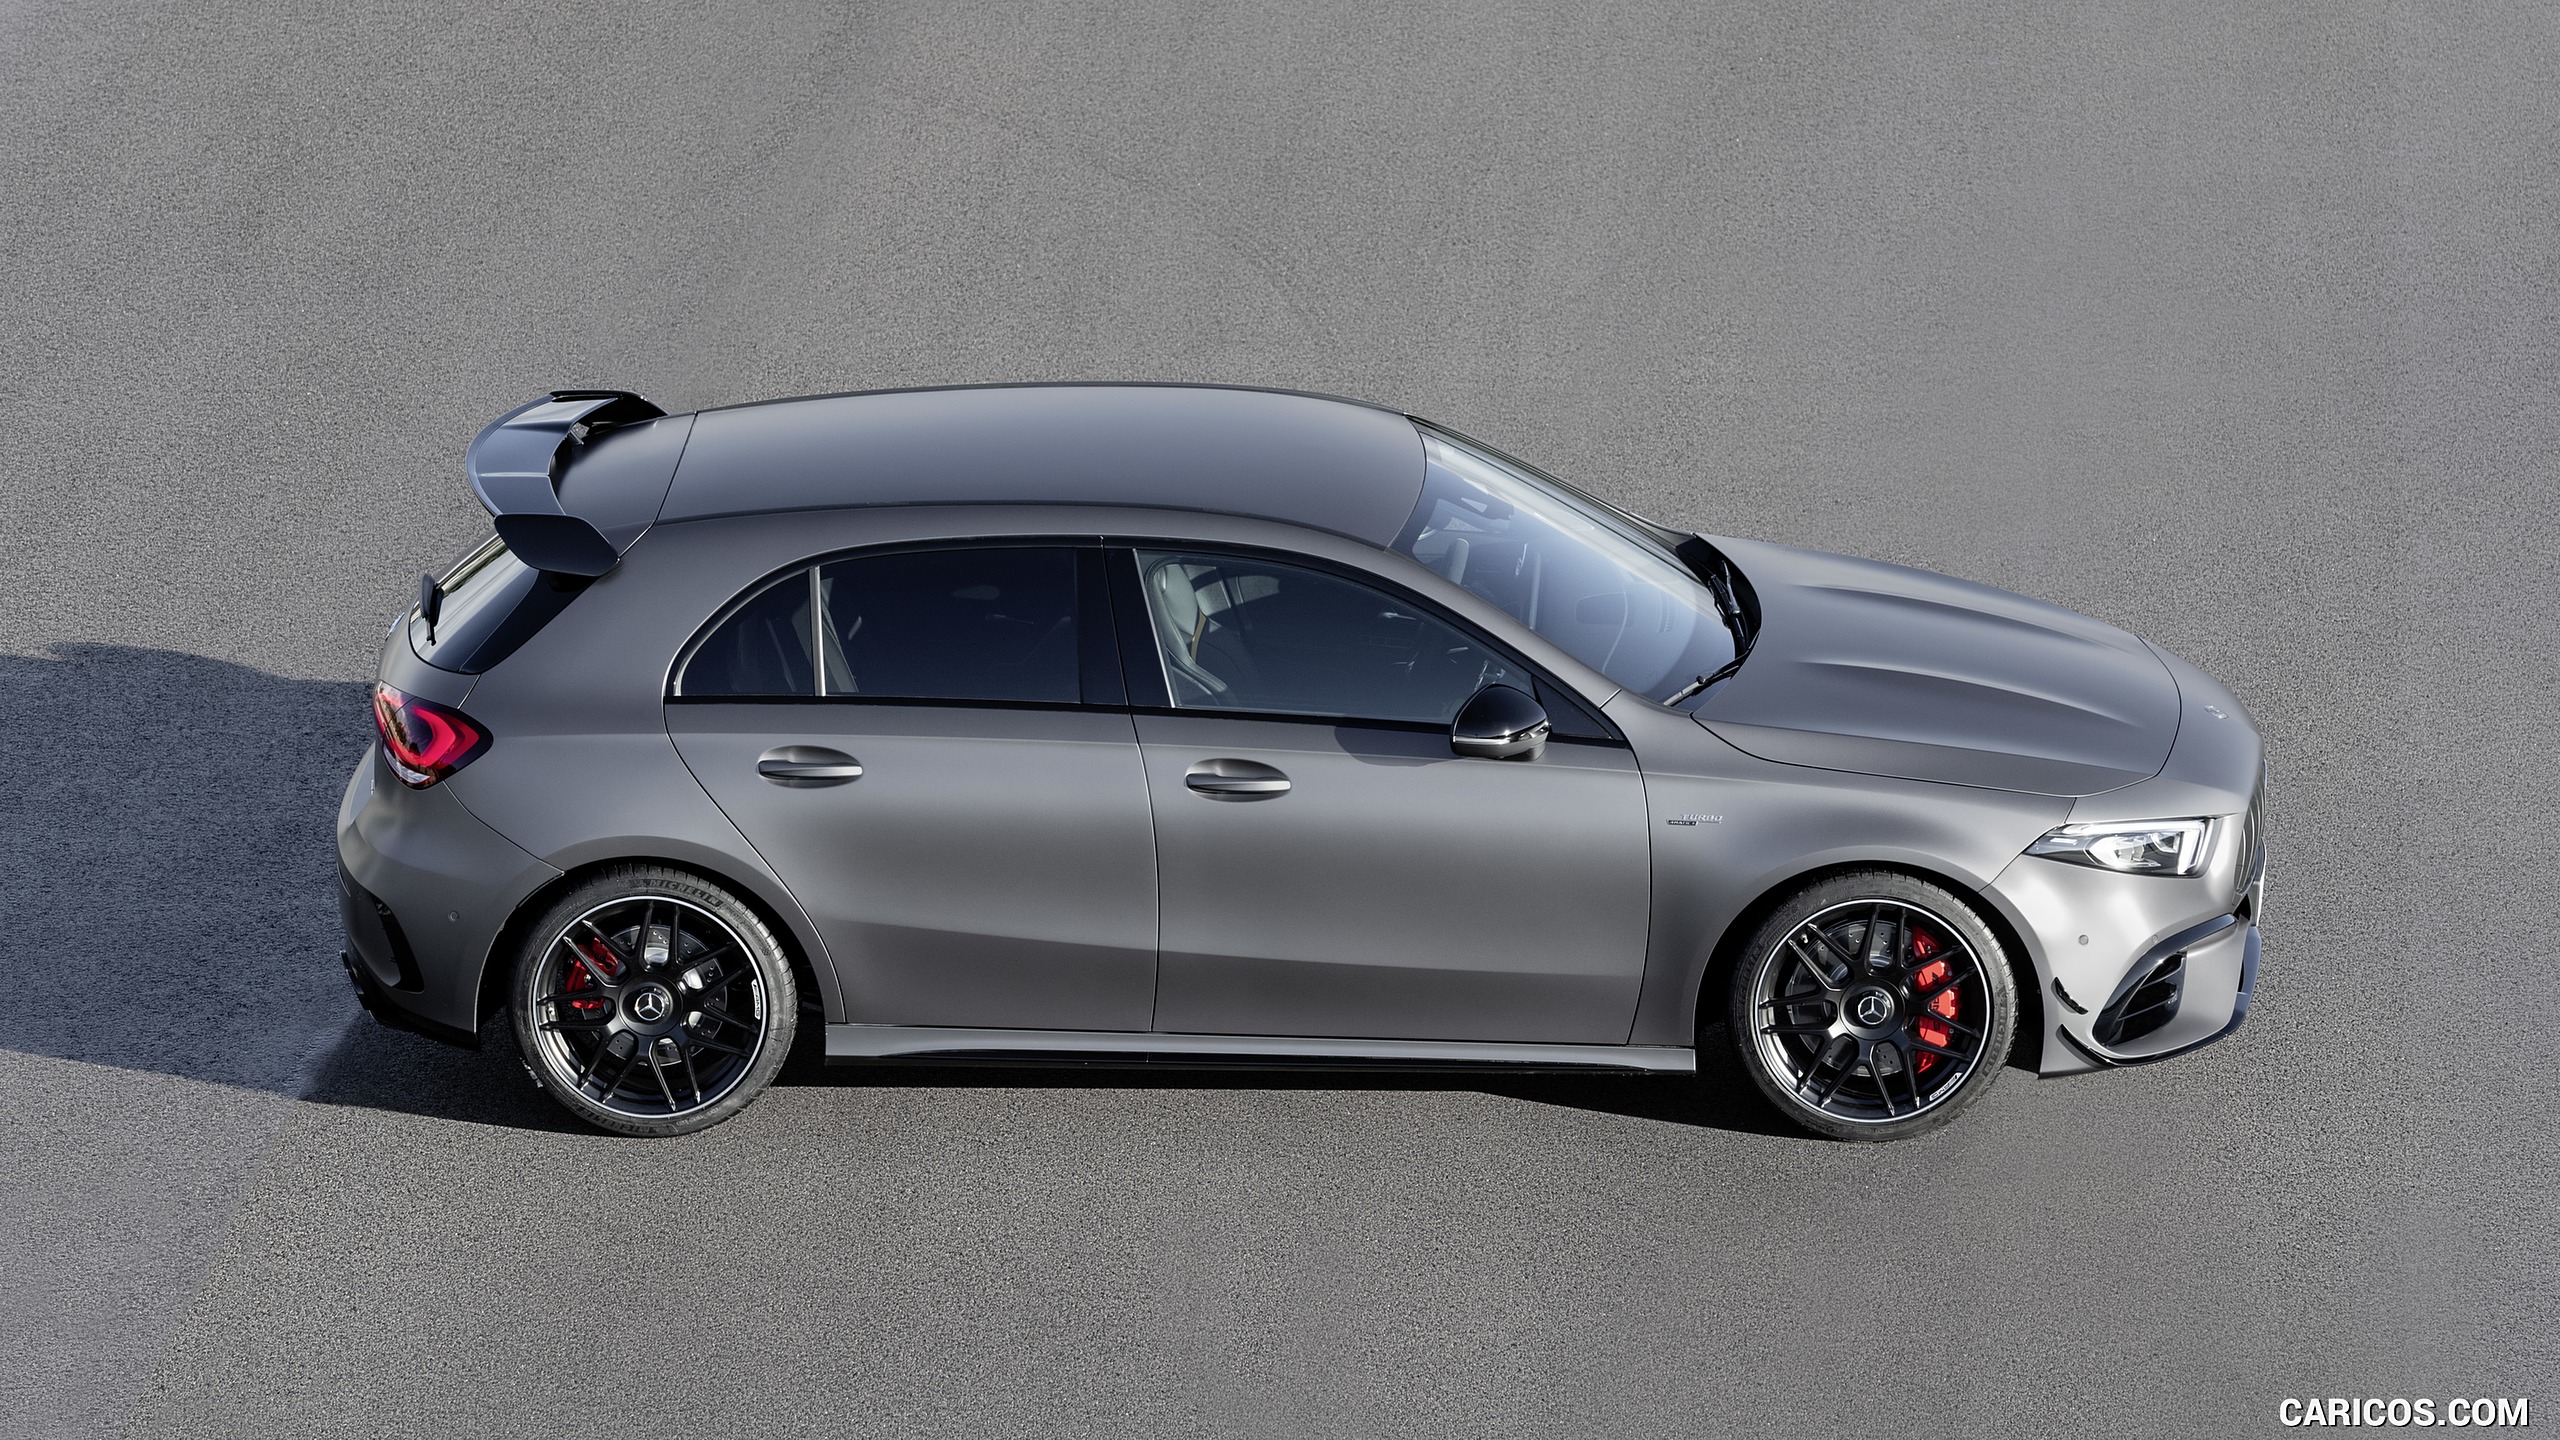 2020 Mercedes-AMG A 45 S 4MATIC+ - Side, #16 of 188